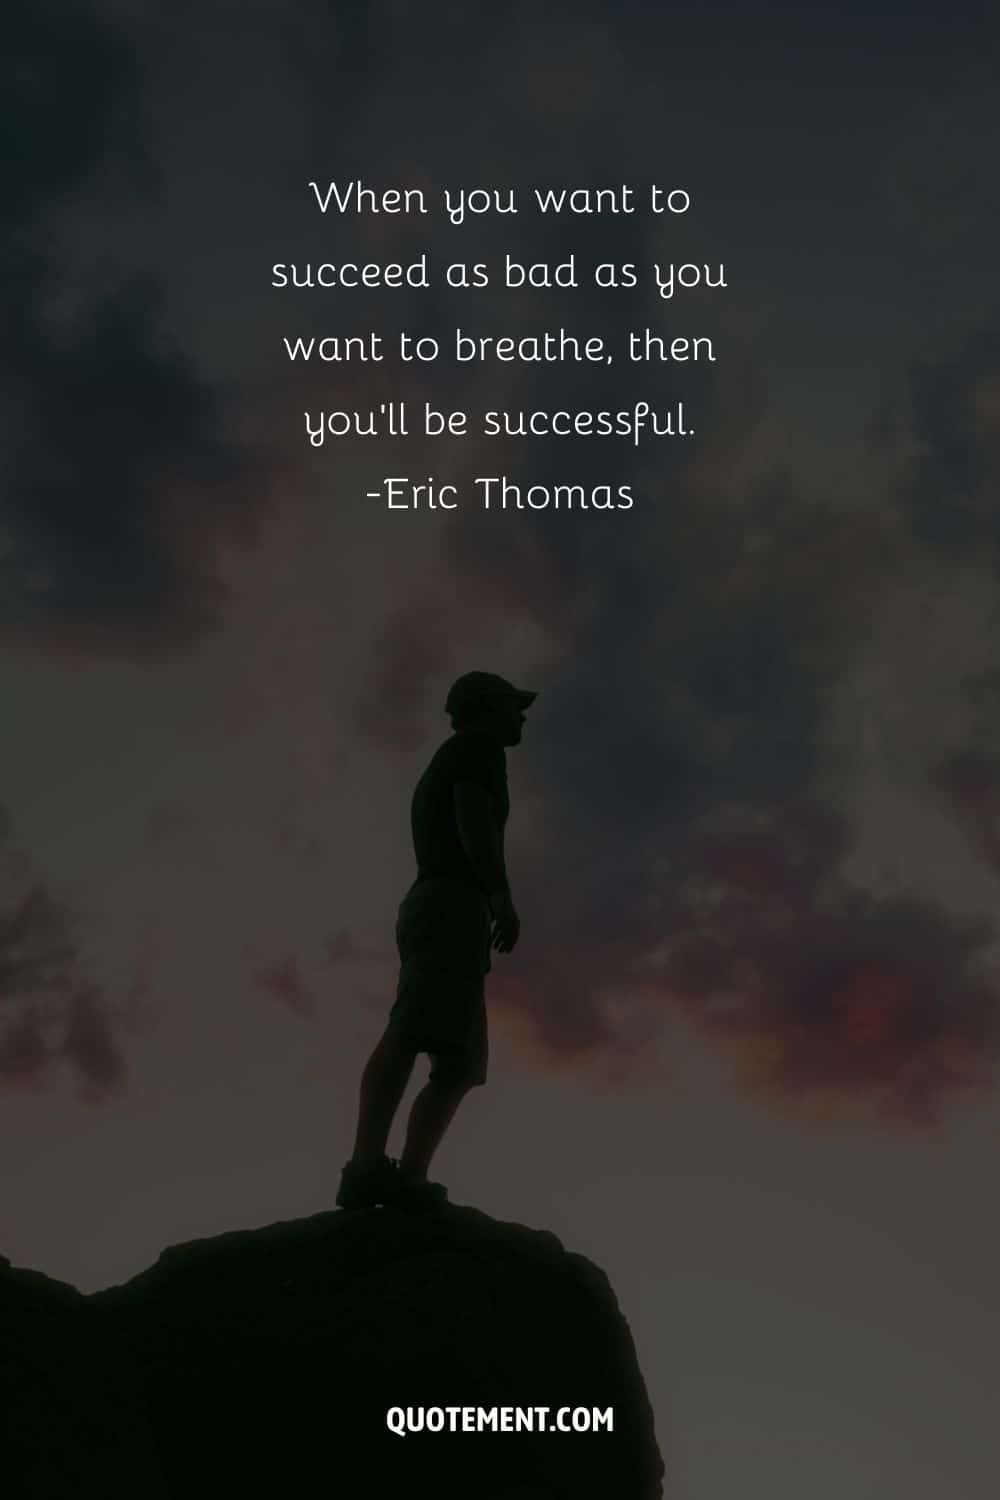 When you want to succeed as bad as you want to breathe, then you’ll be successful 2